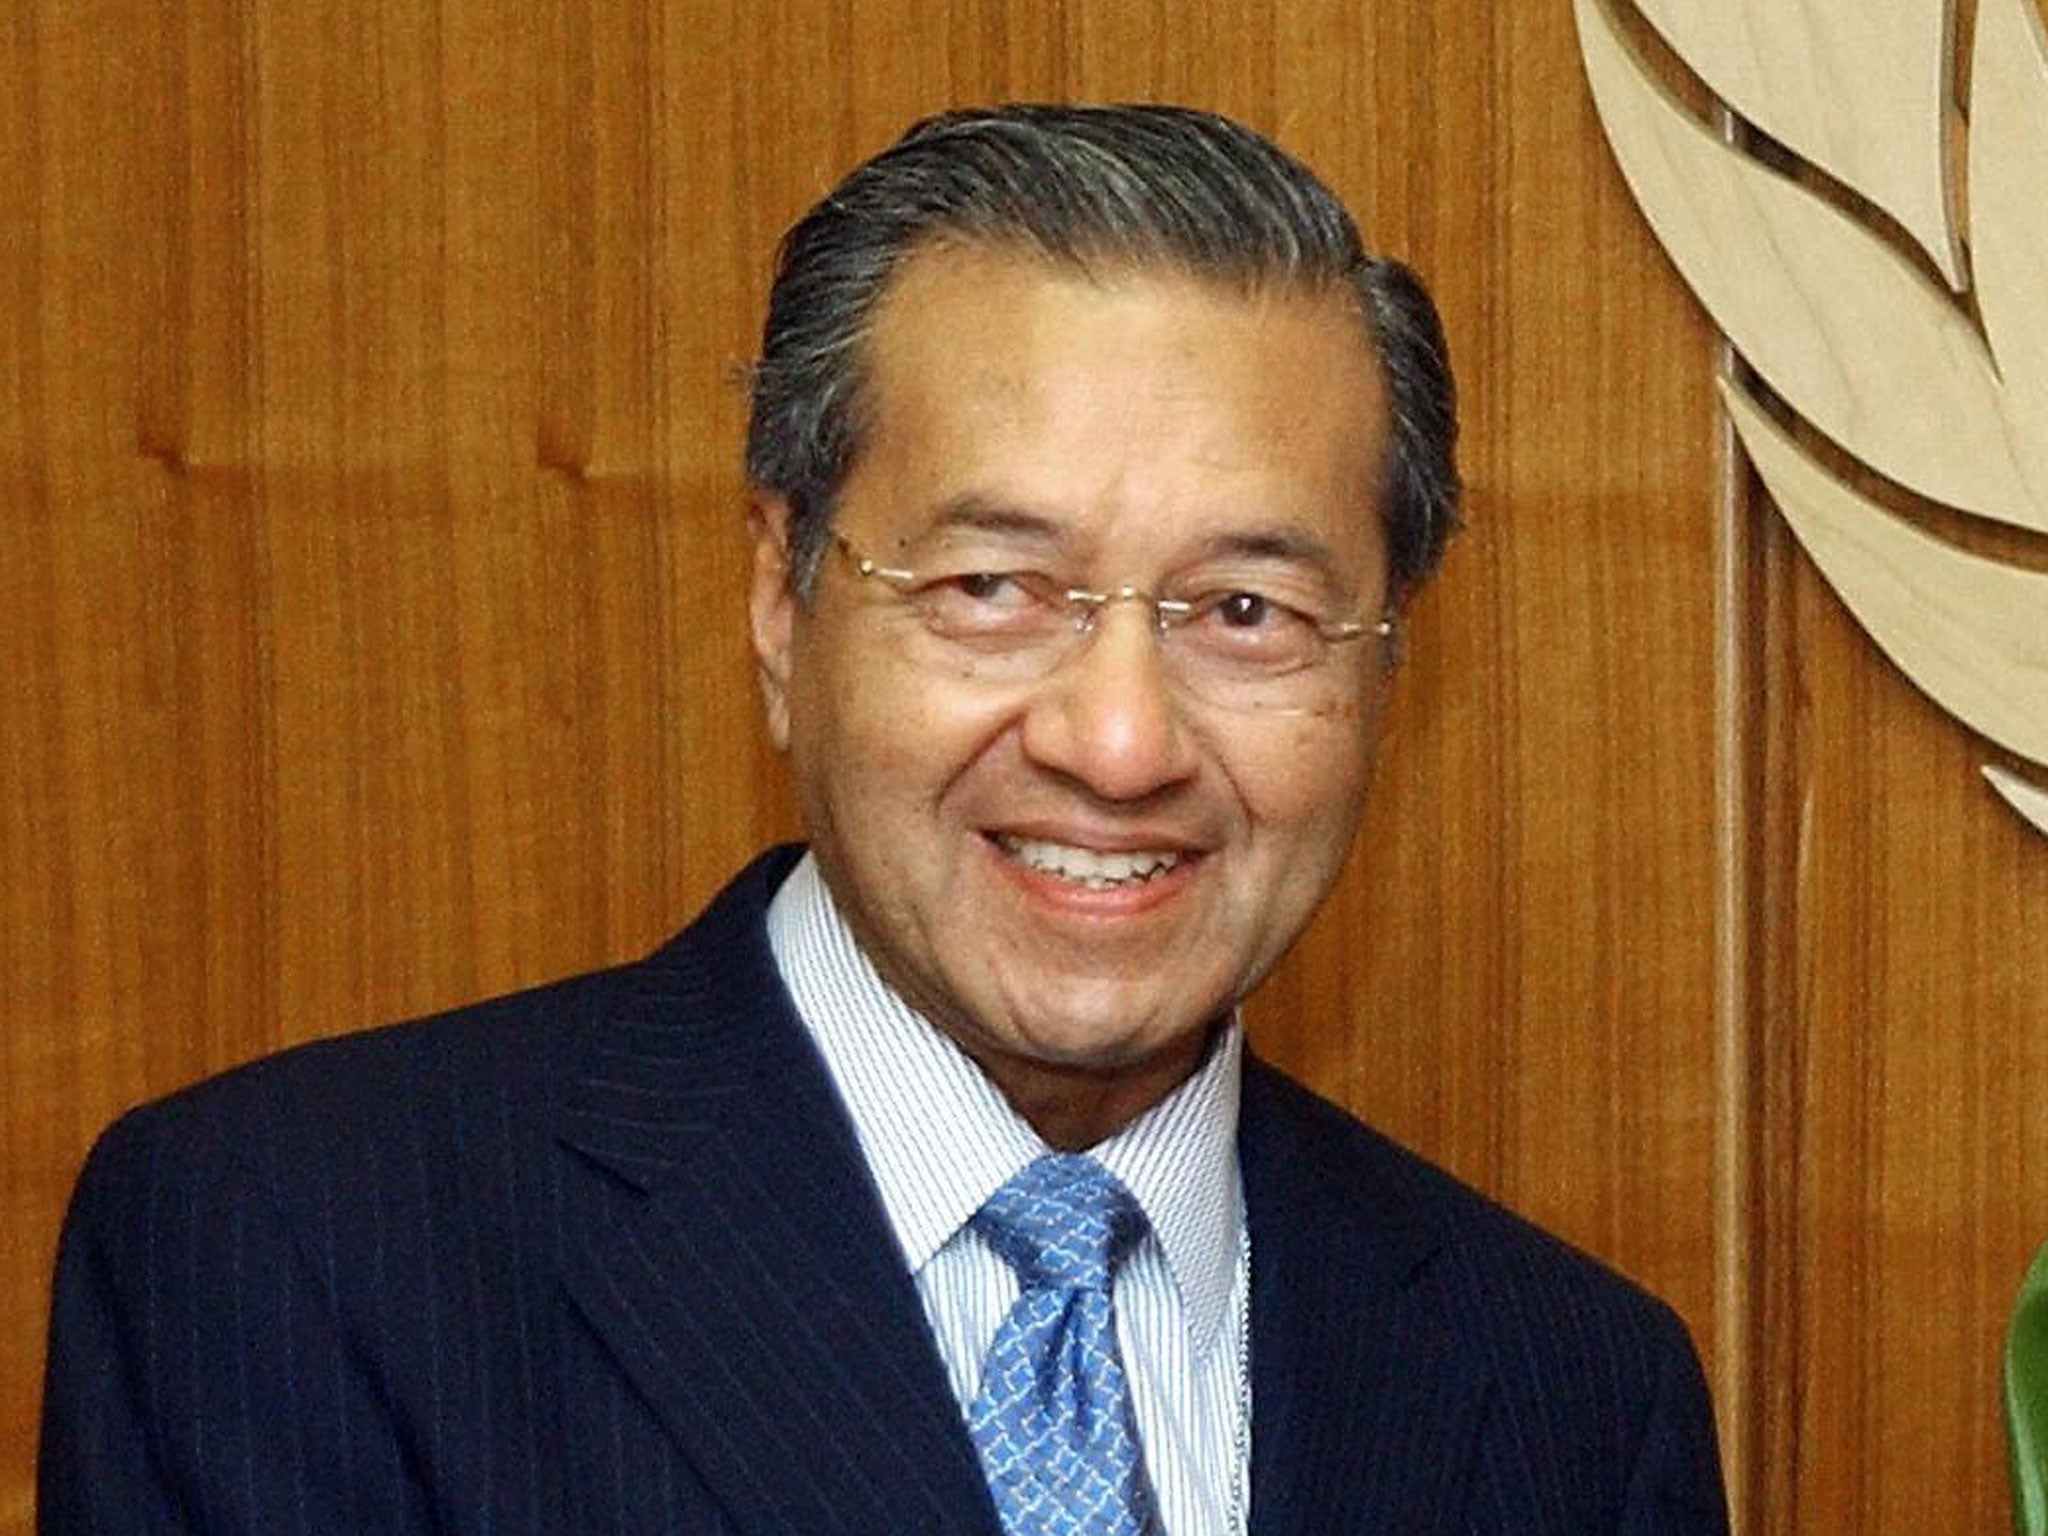 Missing Malaysia Airlines flight MH370 CIA hiding something claims former leader Dr Mahathir Mohamad The Independent The Independent photo pic